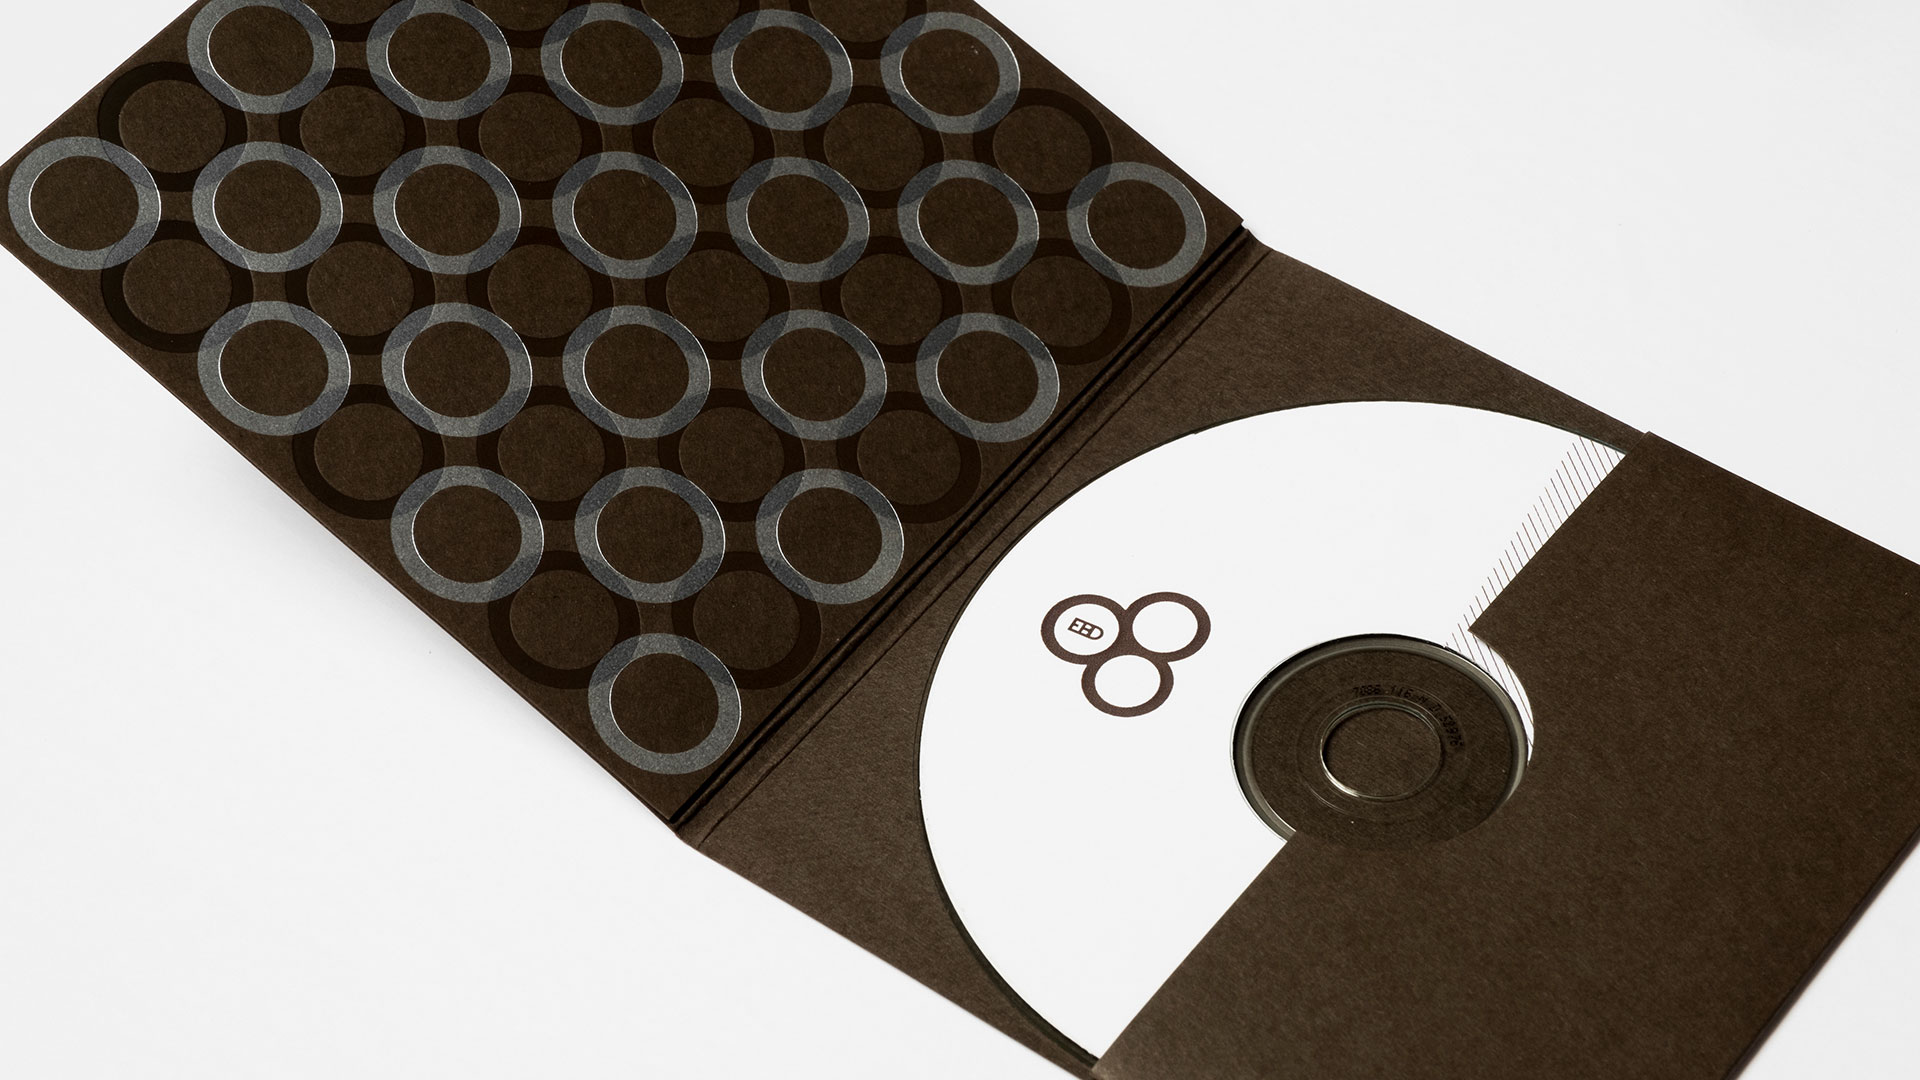 EBD Music Mix Packaging - PaperSpecs